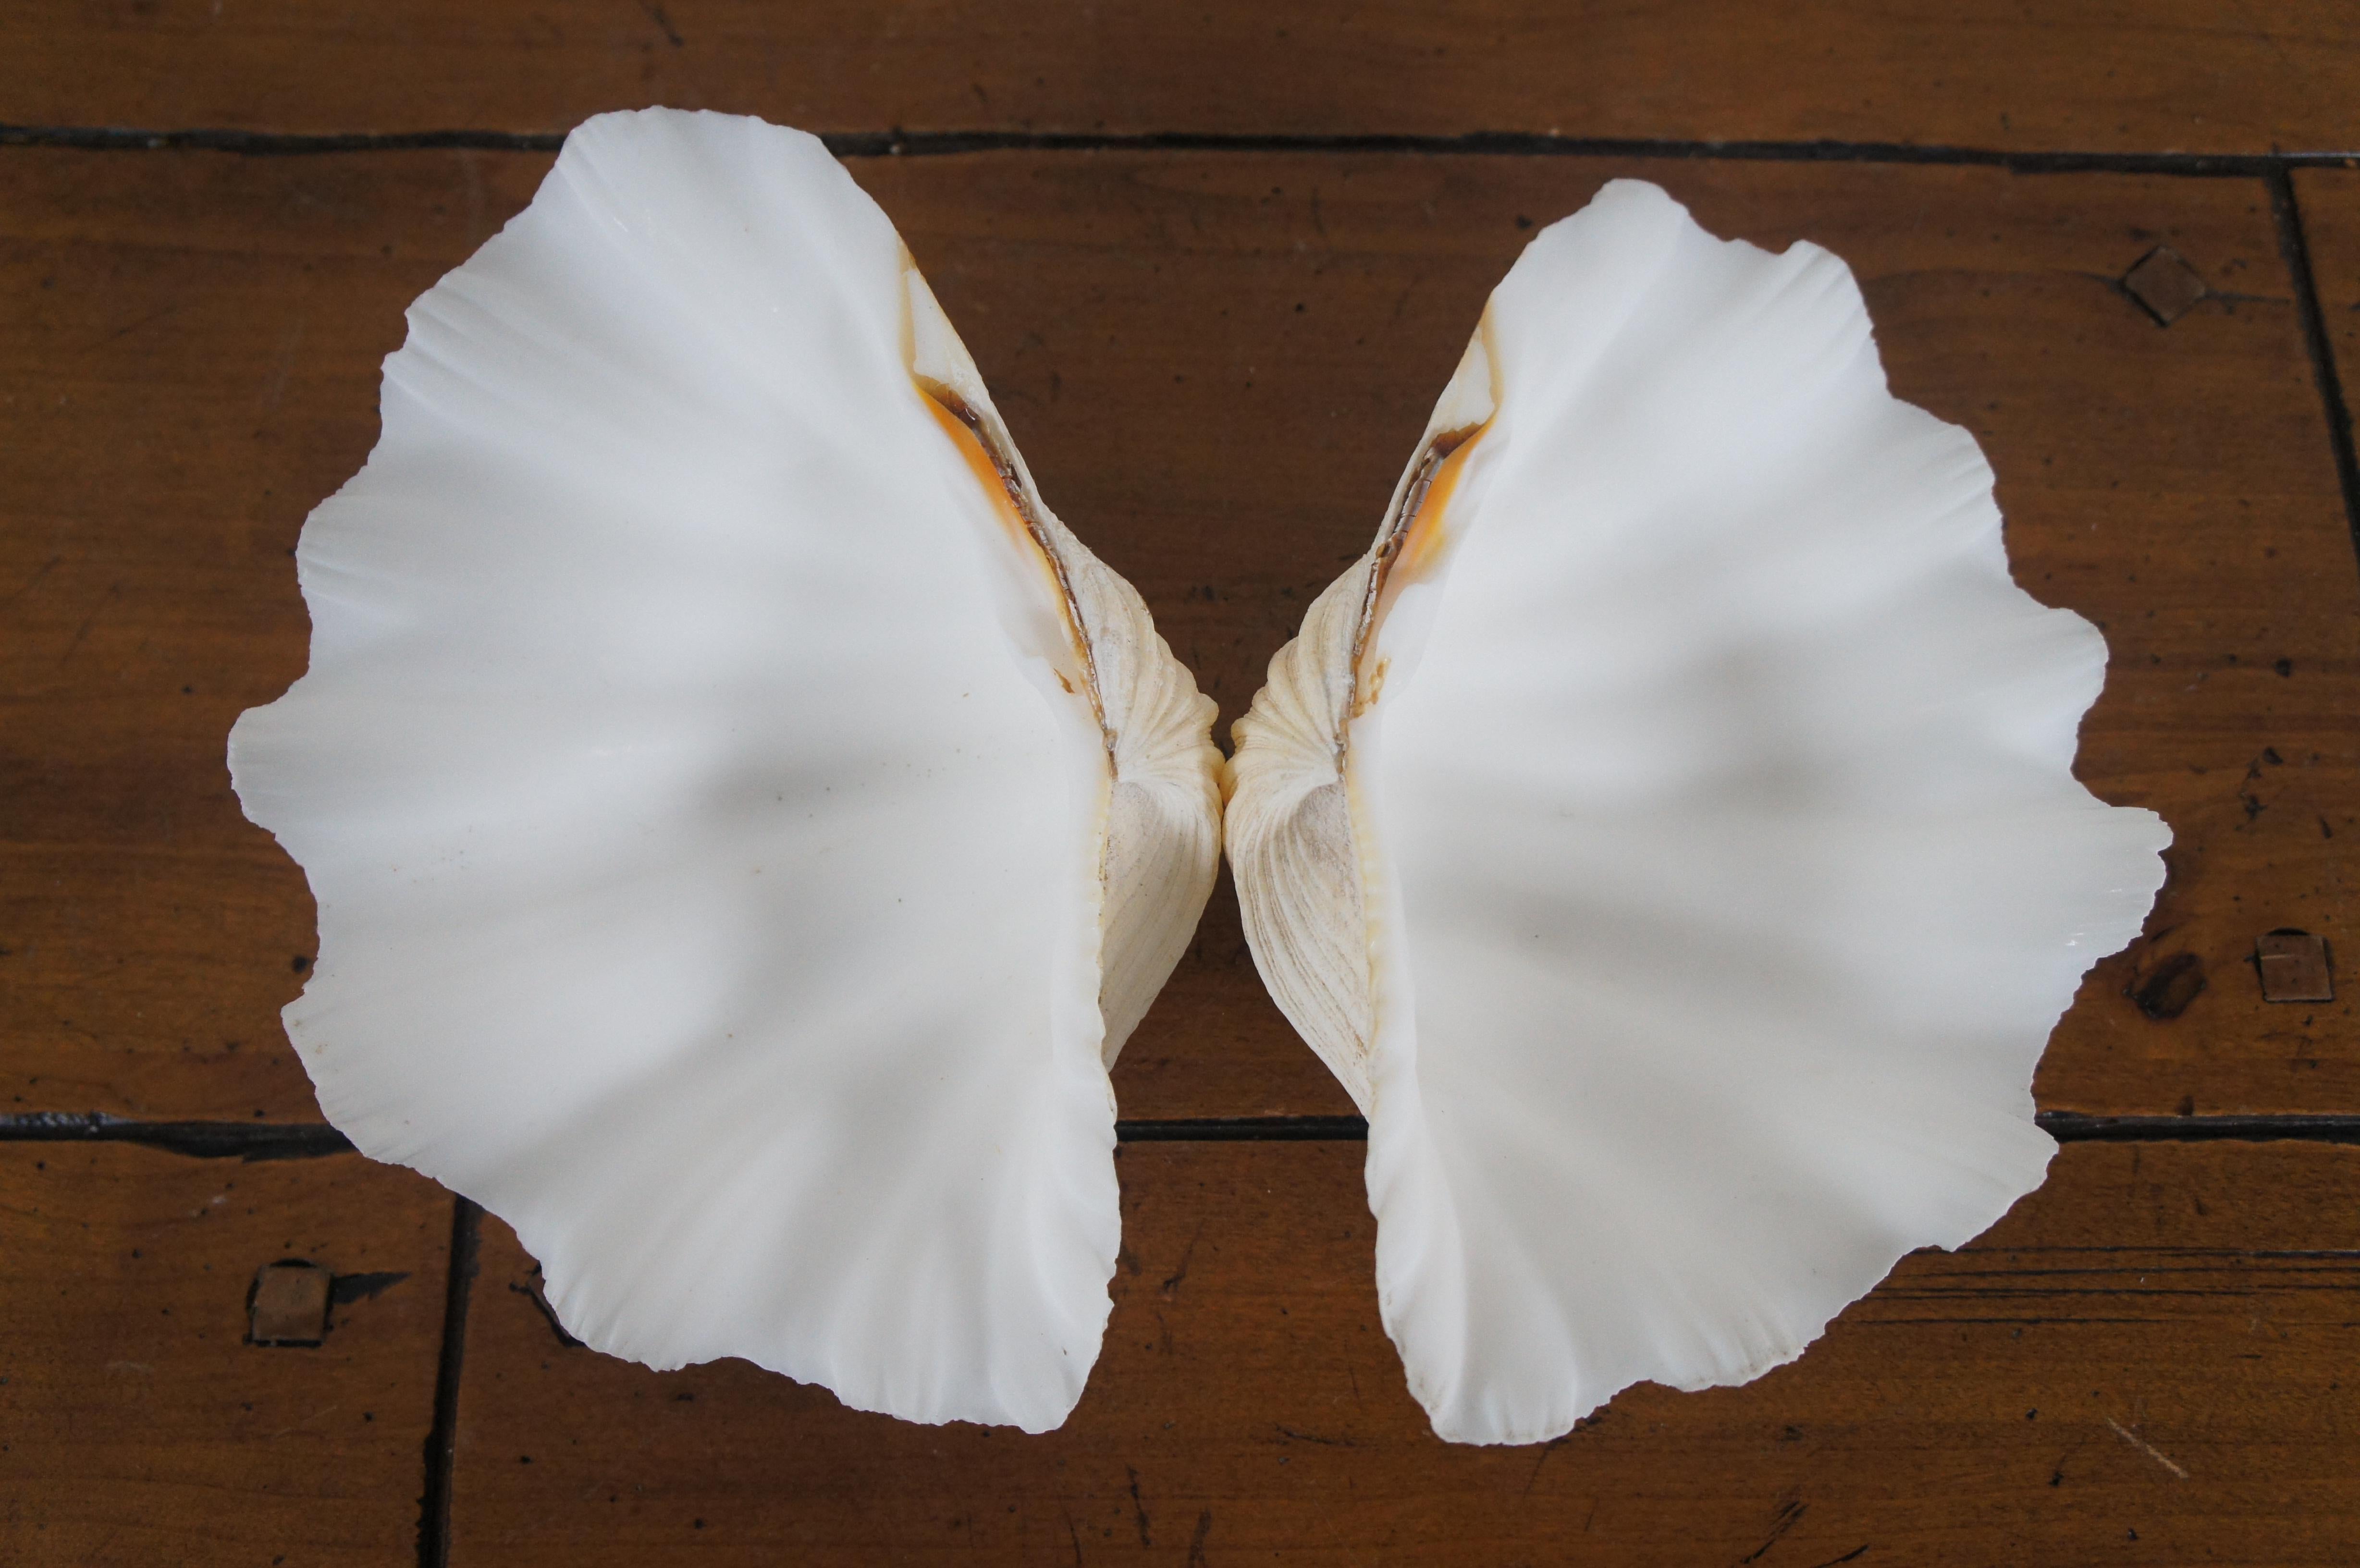 Natural Matching Pair Whole Complete Giant Clam Sea Shell Tridacna Gugas 10